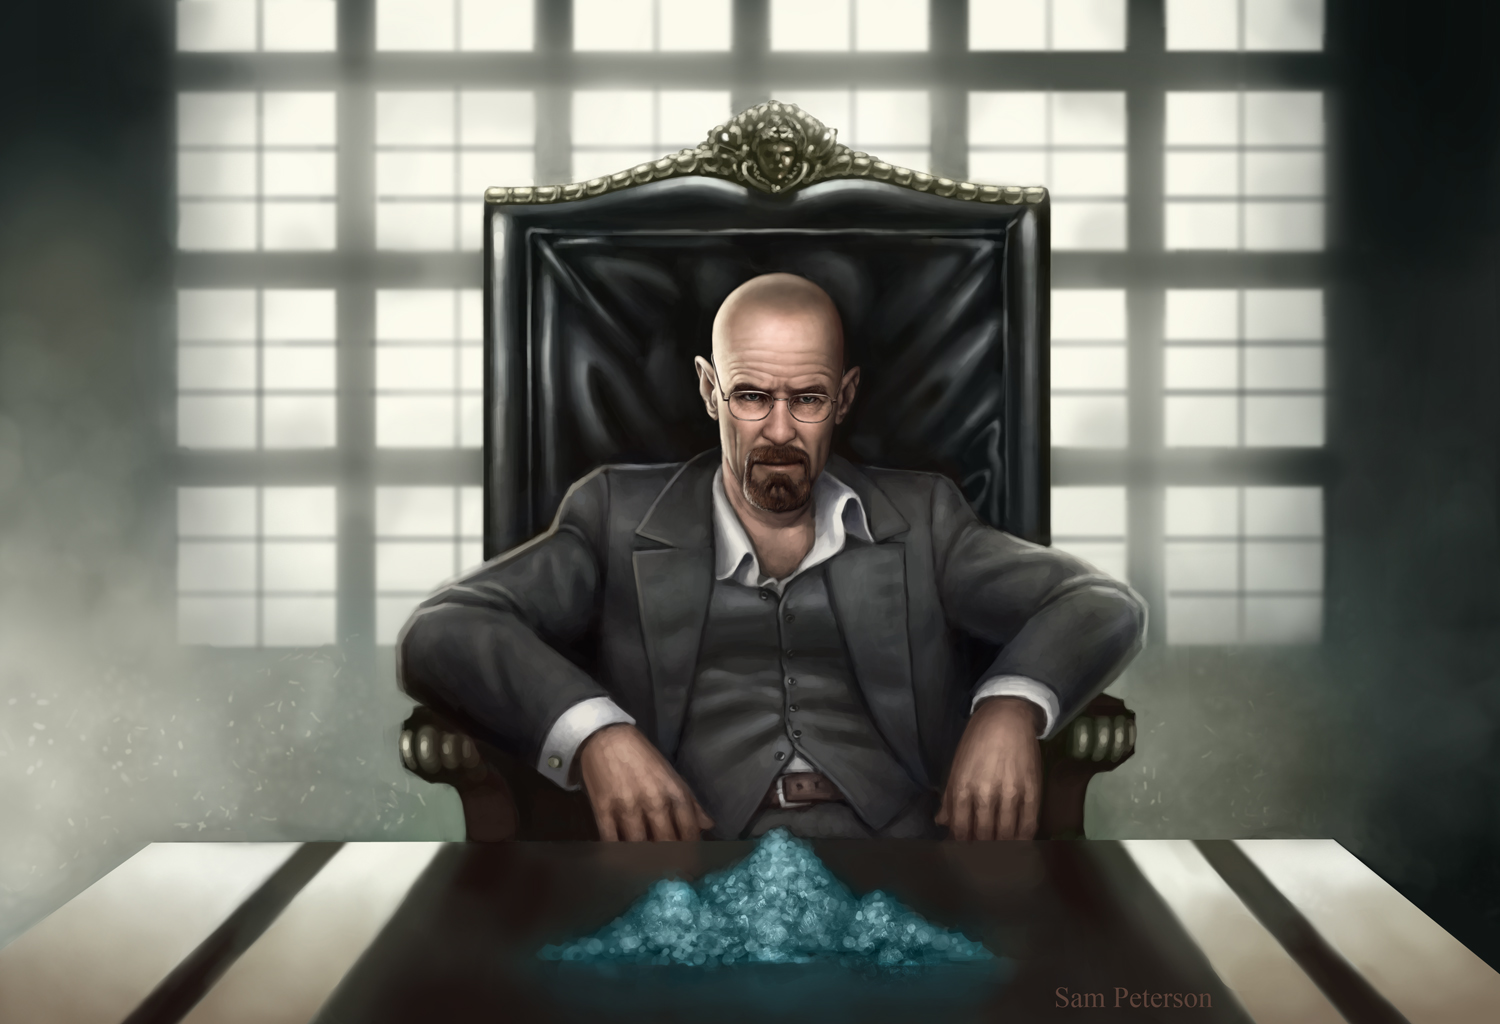 General 1500x1024 Breaking Bad fictional Walter White frontal view crossover Scarface TV series movies